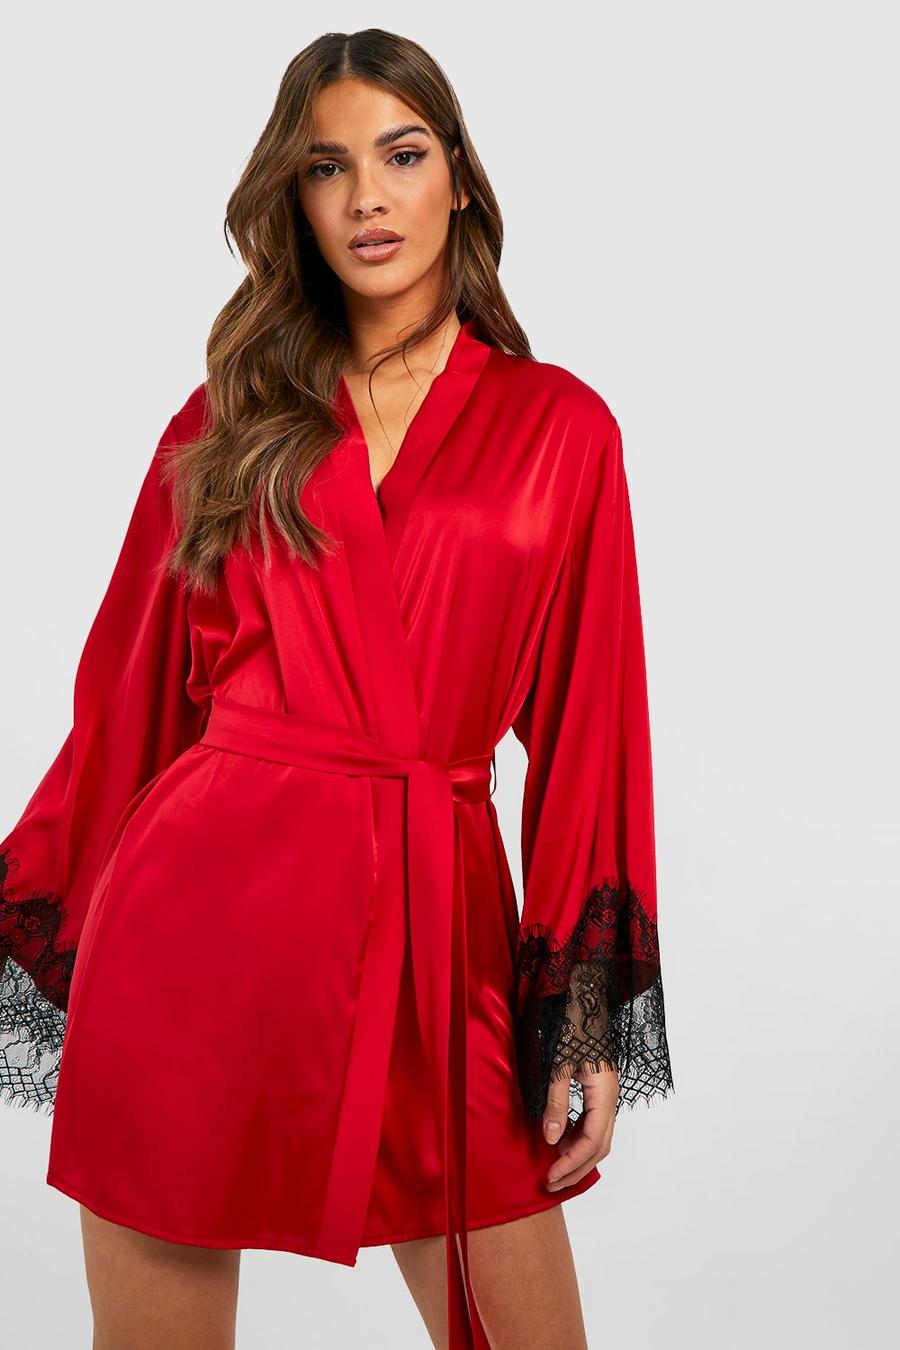 Red Lace & Satin Robe 